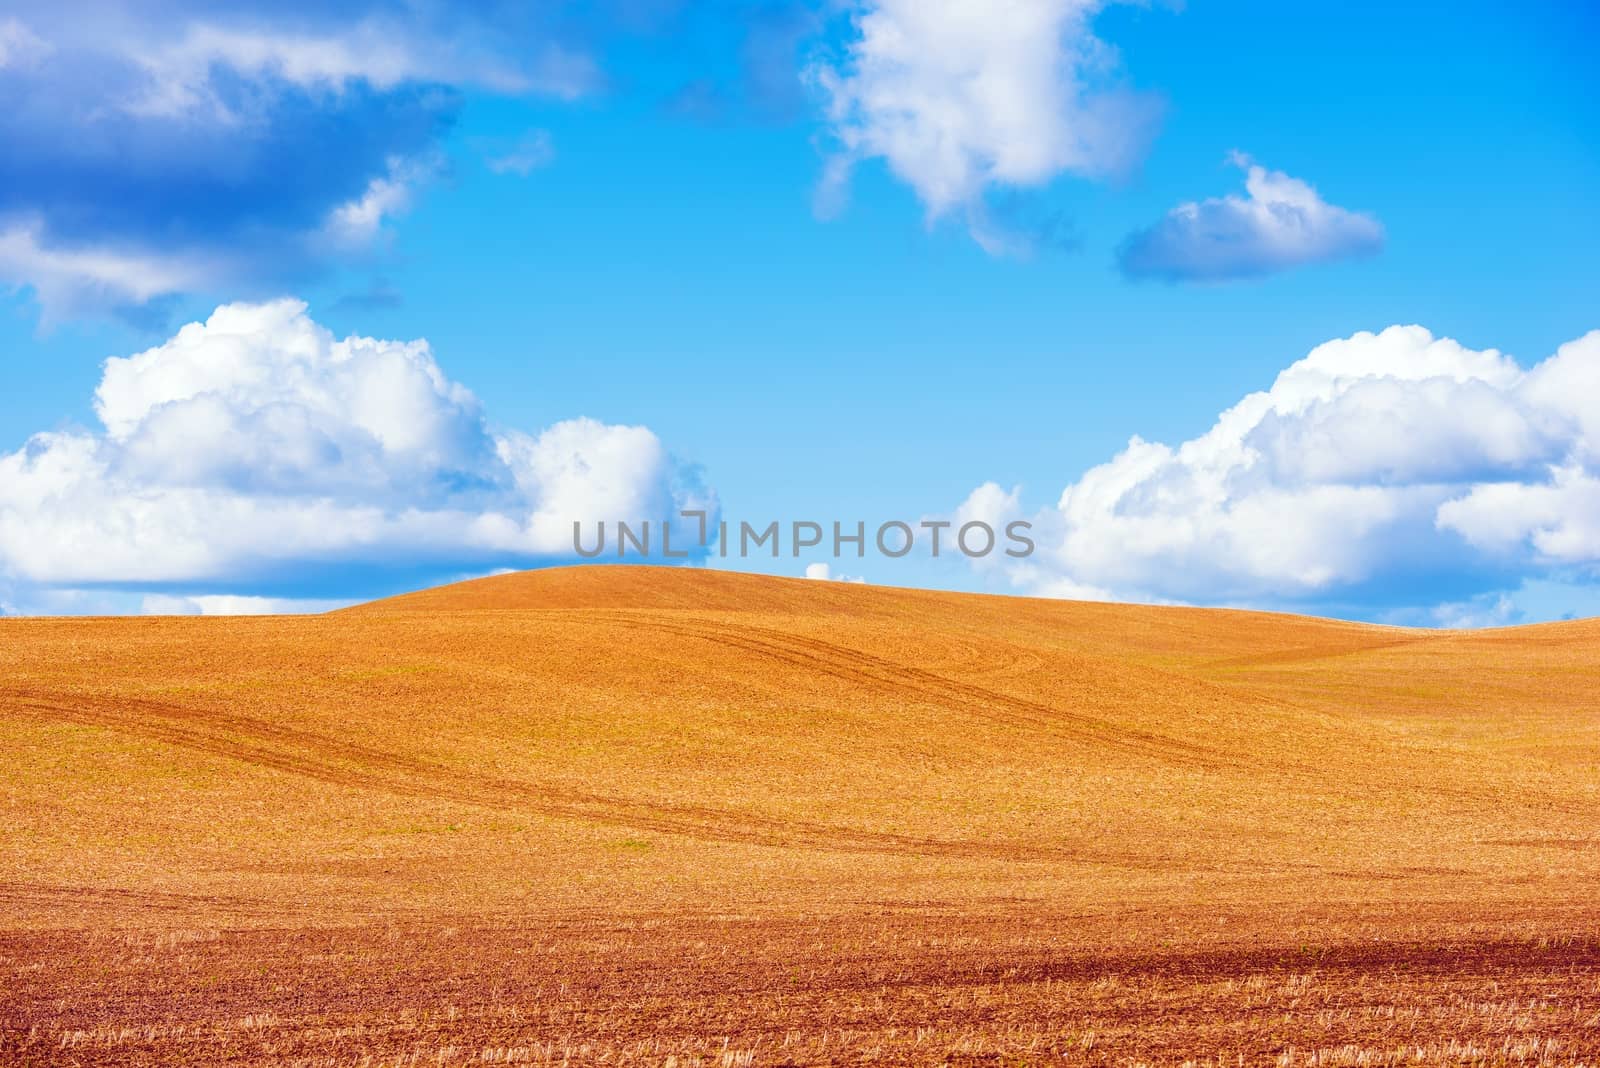 Scenic Stubble Farmland and the Blue Sky. Scenic Sunny Landscape. Cut Stalks of Grain Plants Left Sticking Out of the Ground.